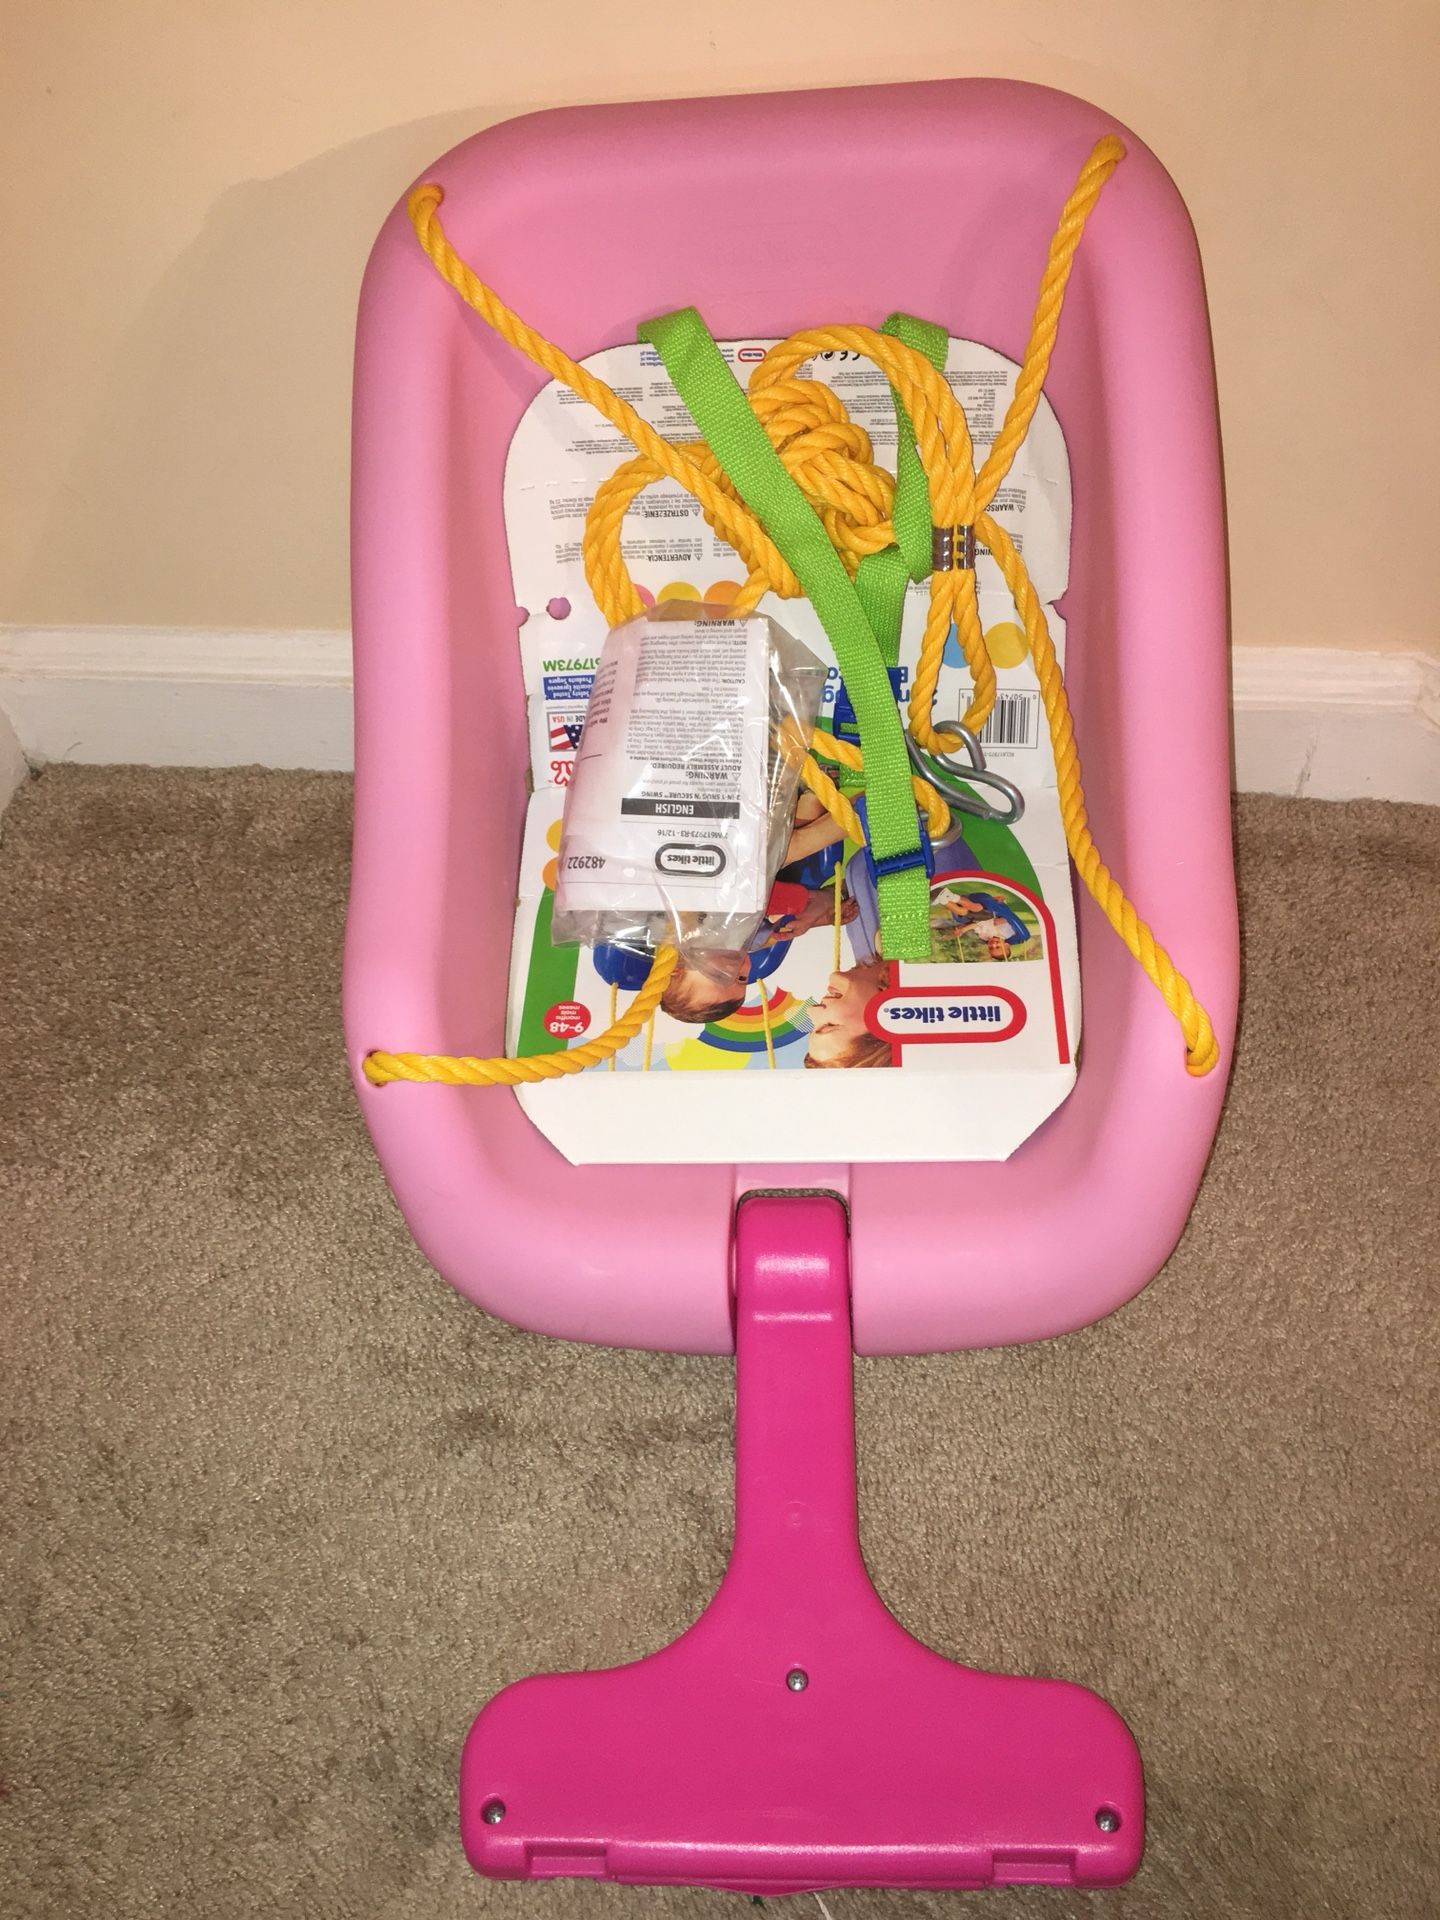 New Little Tikes 2-in-1 Snug and Secure Swing Pink/Swing for kids